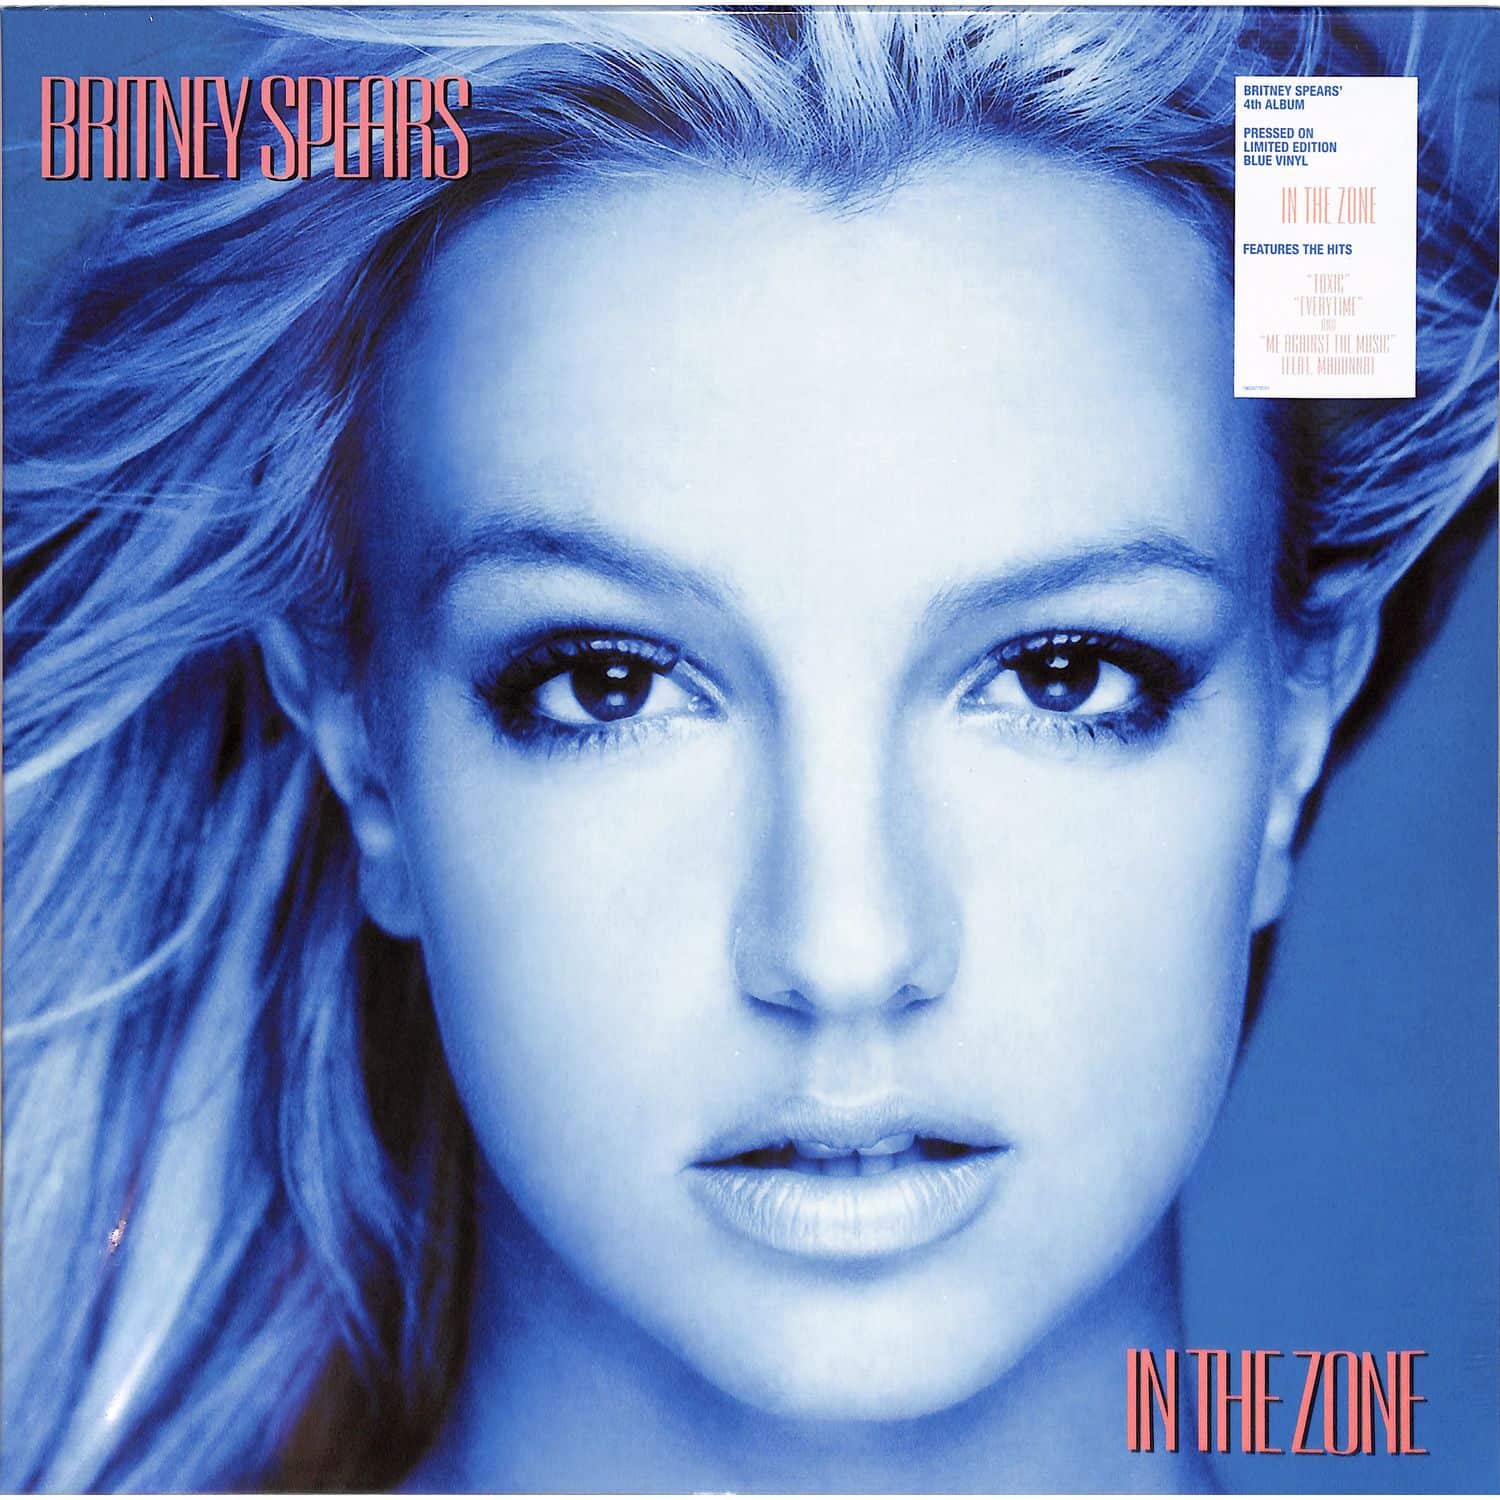 Britney Spears - IN THE ZONE / OPAQUE BLUE VINYL 